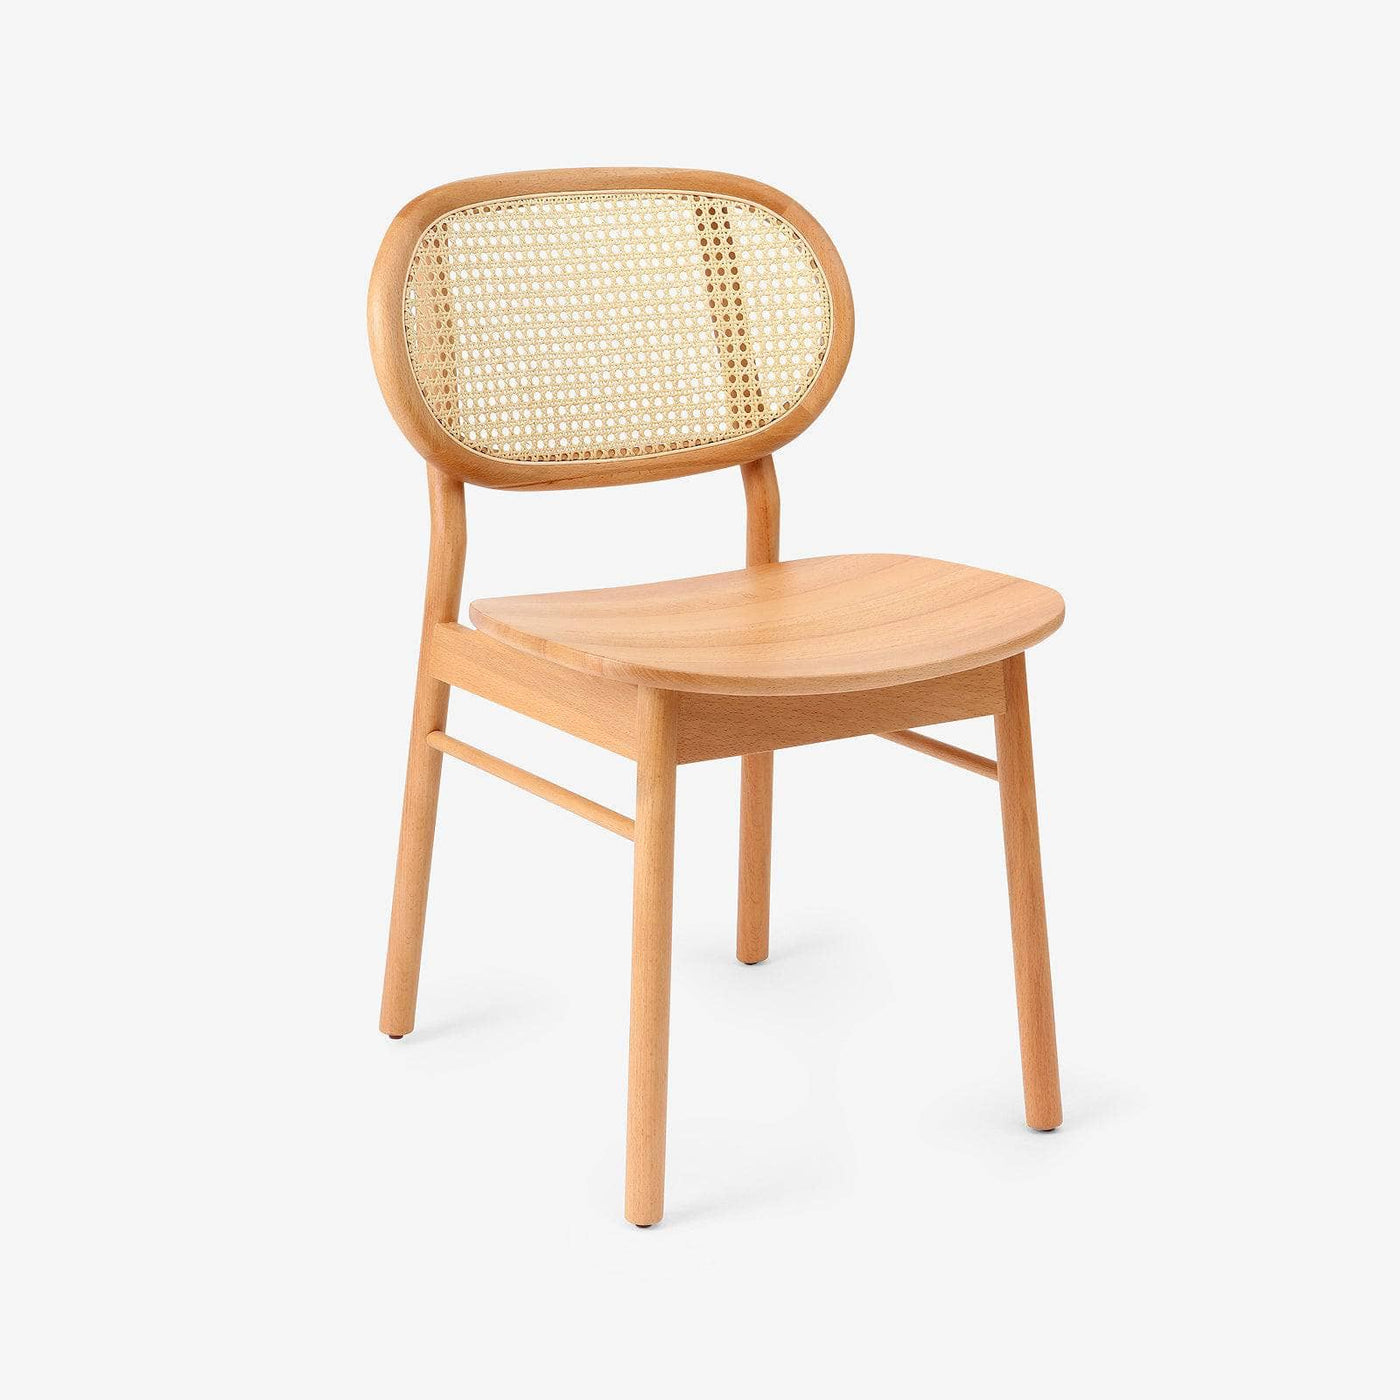 Palermo Wooden Rattan Chair, Wood 4